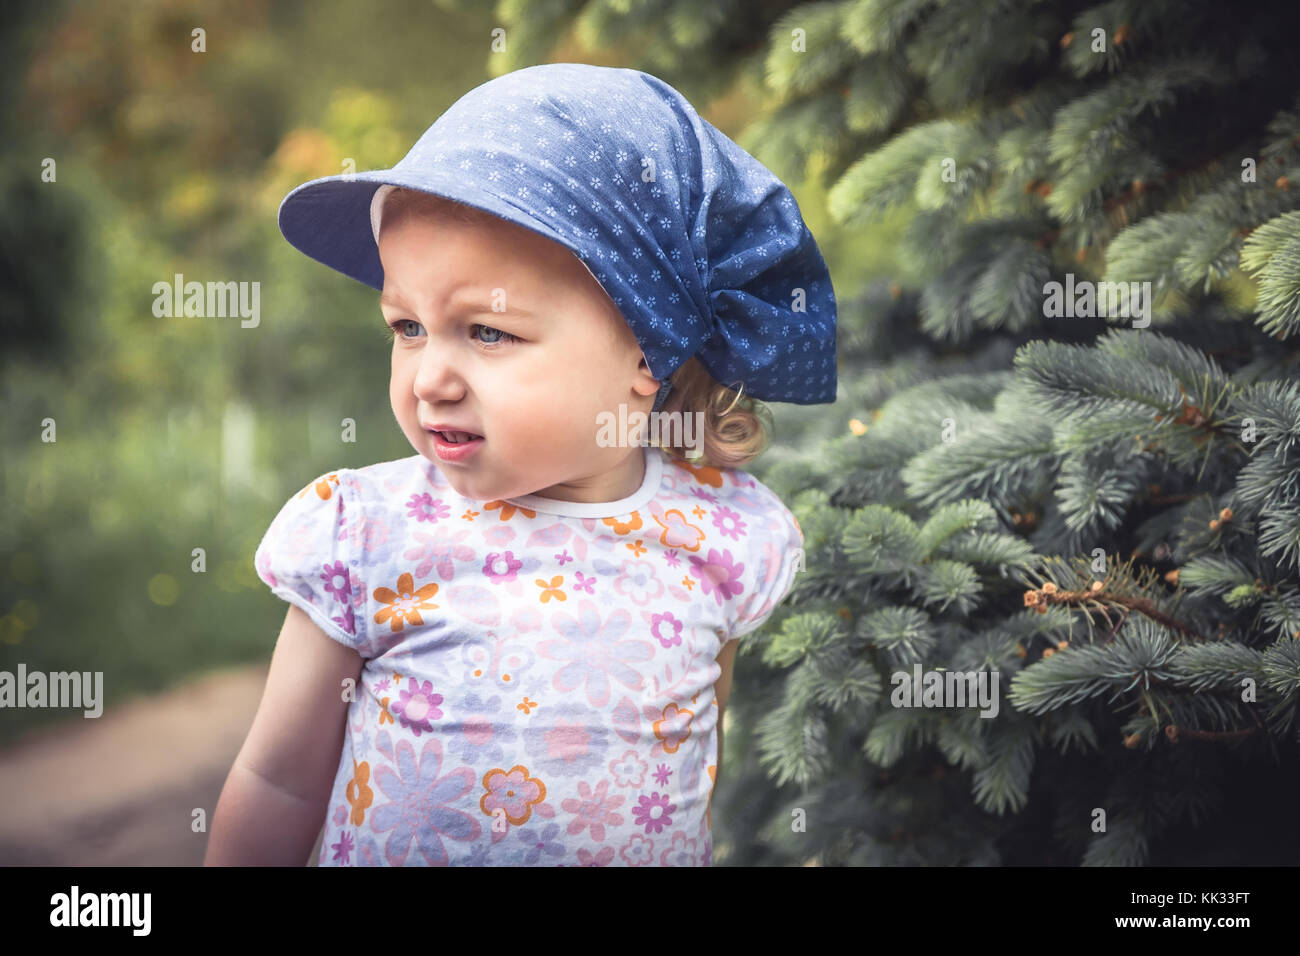 Mischievous frouned child girl portrait among fir trees on blurred background Stock Photo